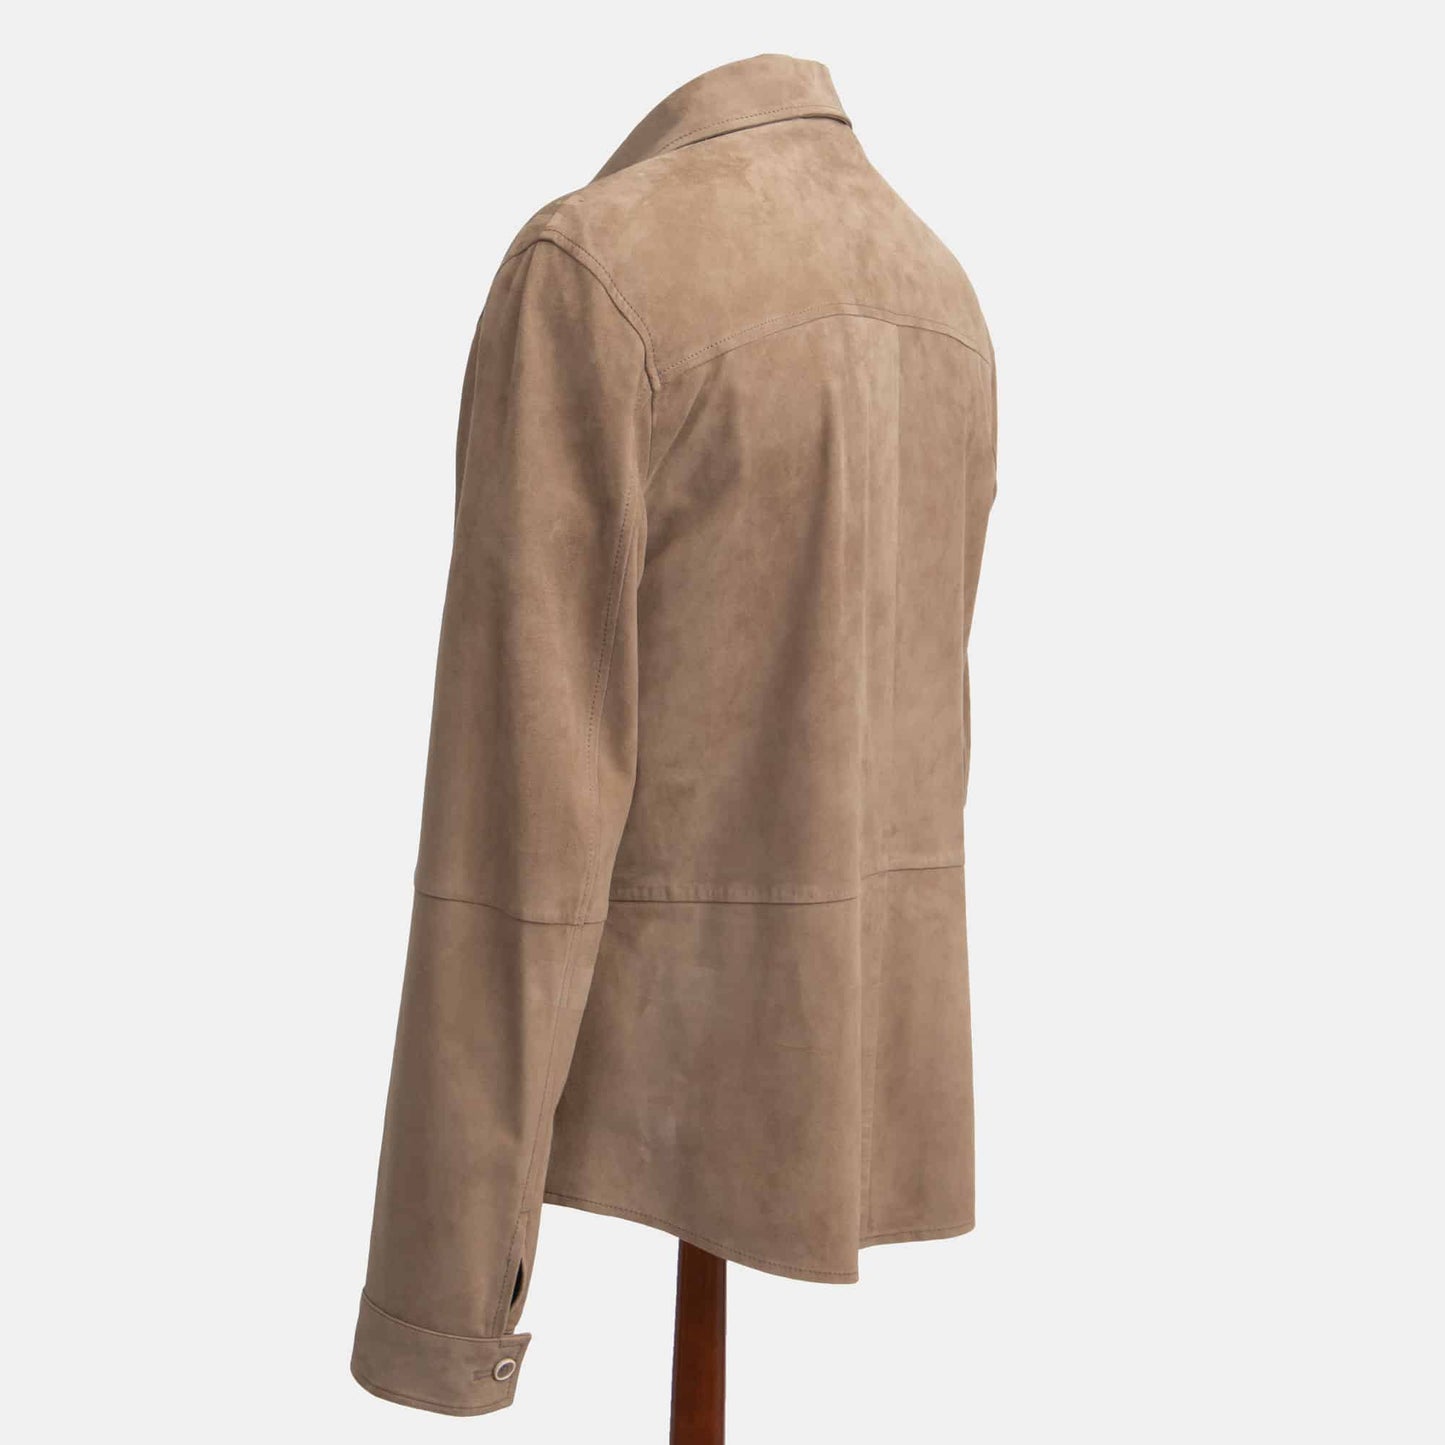 Khaki's of Carmel - Gimo's Goat Suede Overshirt Button Jacket in Brown